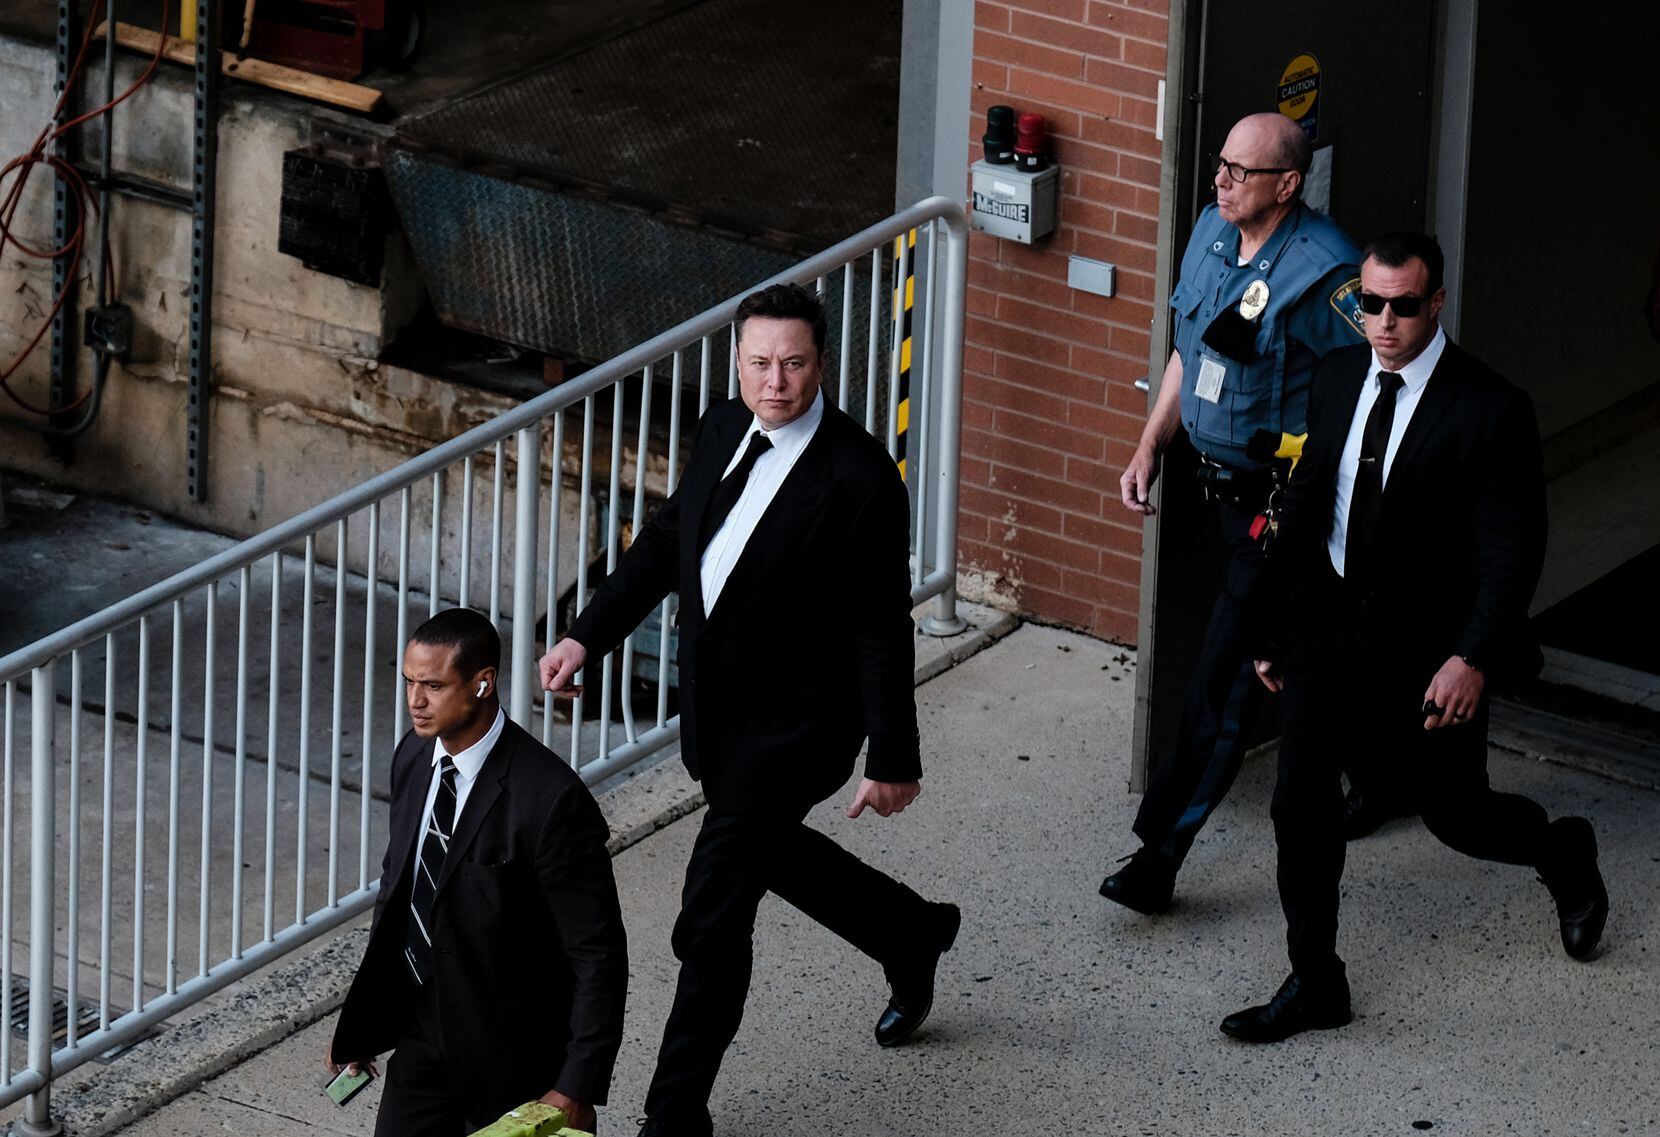 Tesla CEO Elon Musk leaves a courthouse after testifying in a court case on July 12 in...